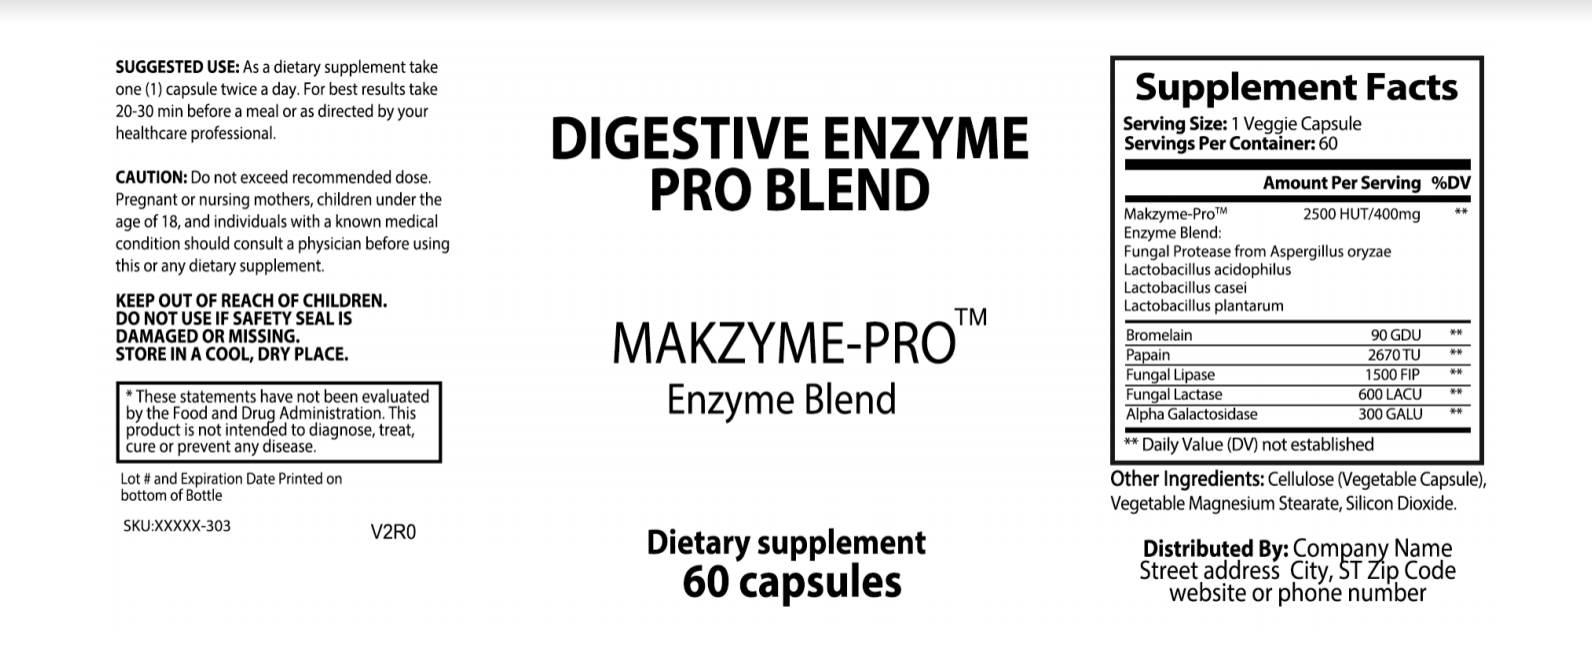 digestive enzymes white label, digestive enzymes private label